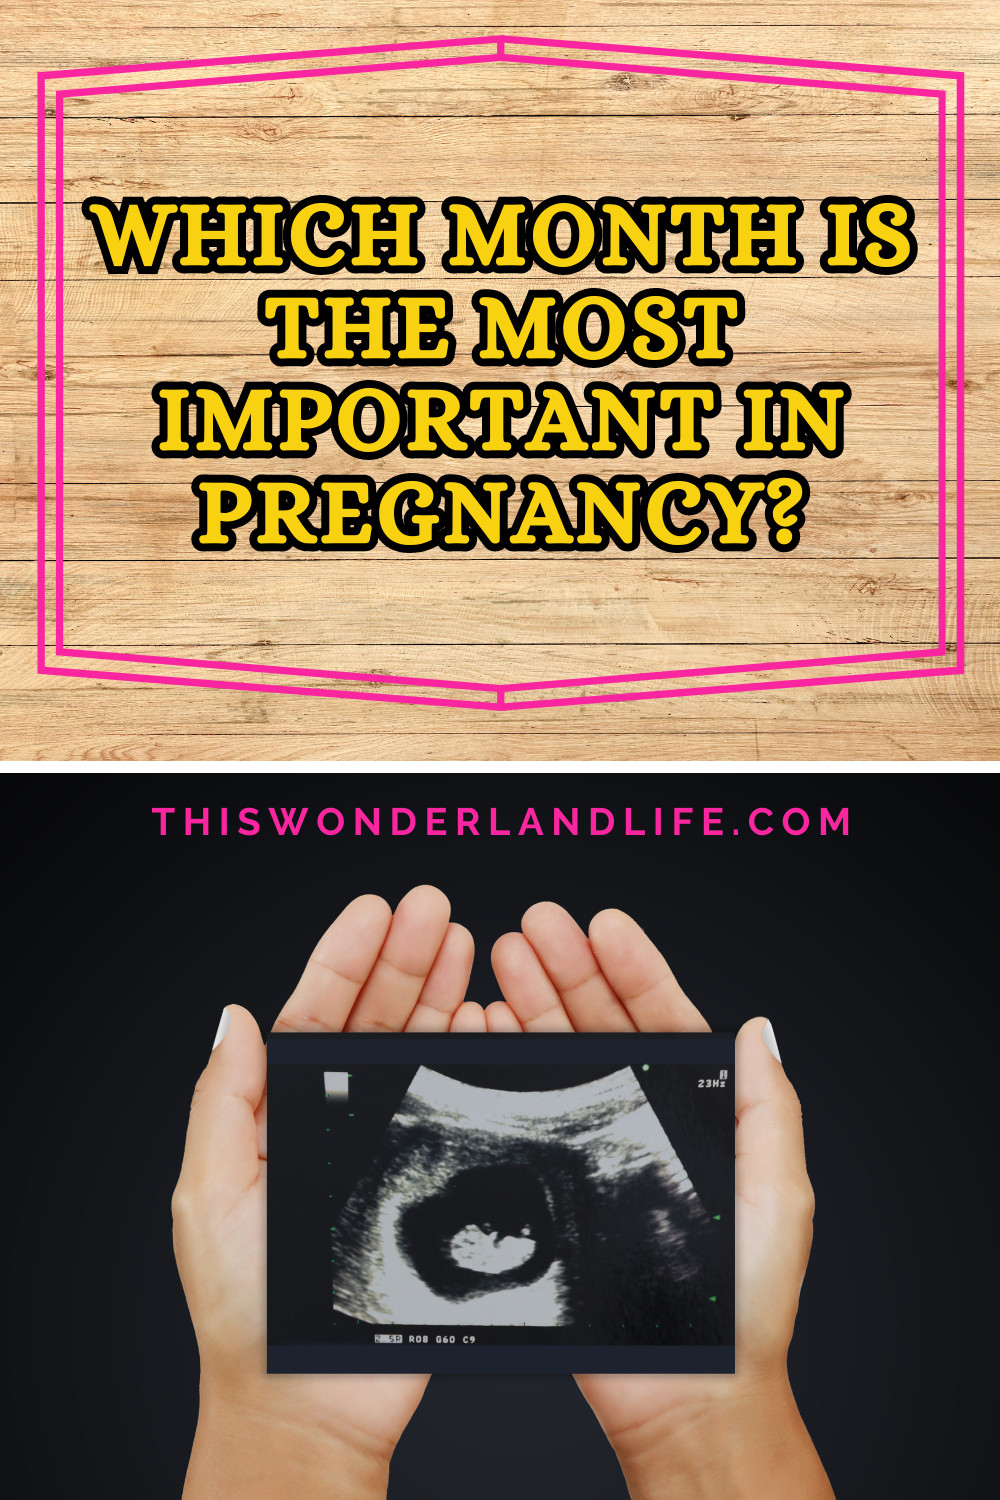 Which Month Is the Most Important in Pregnancy?